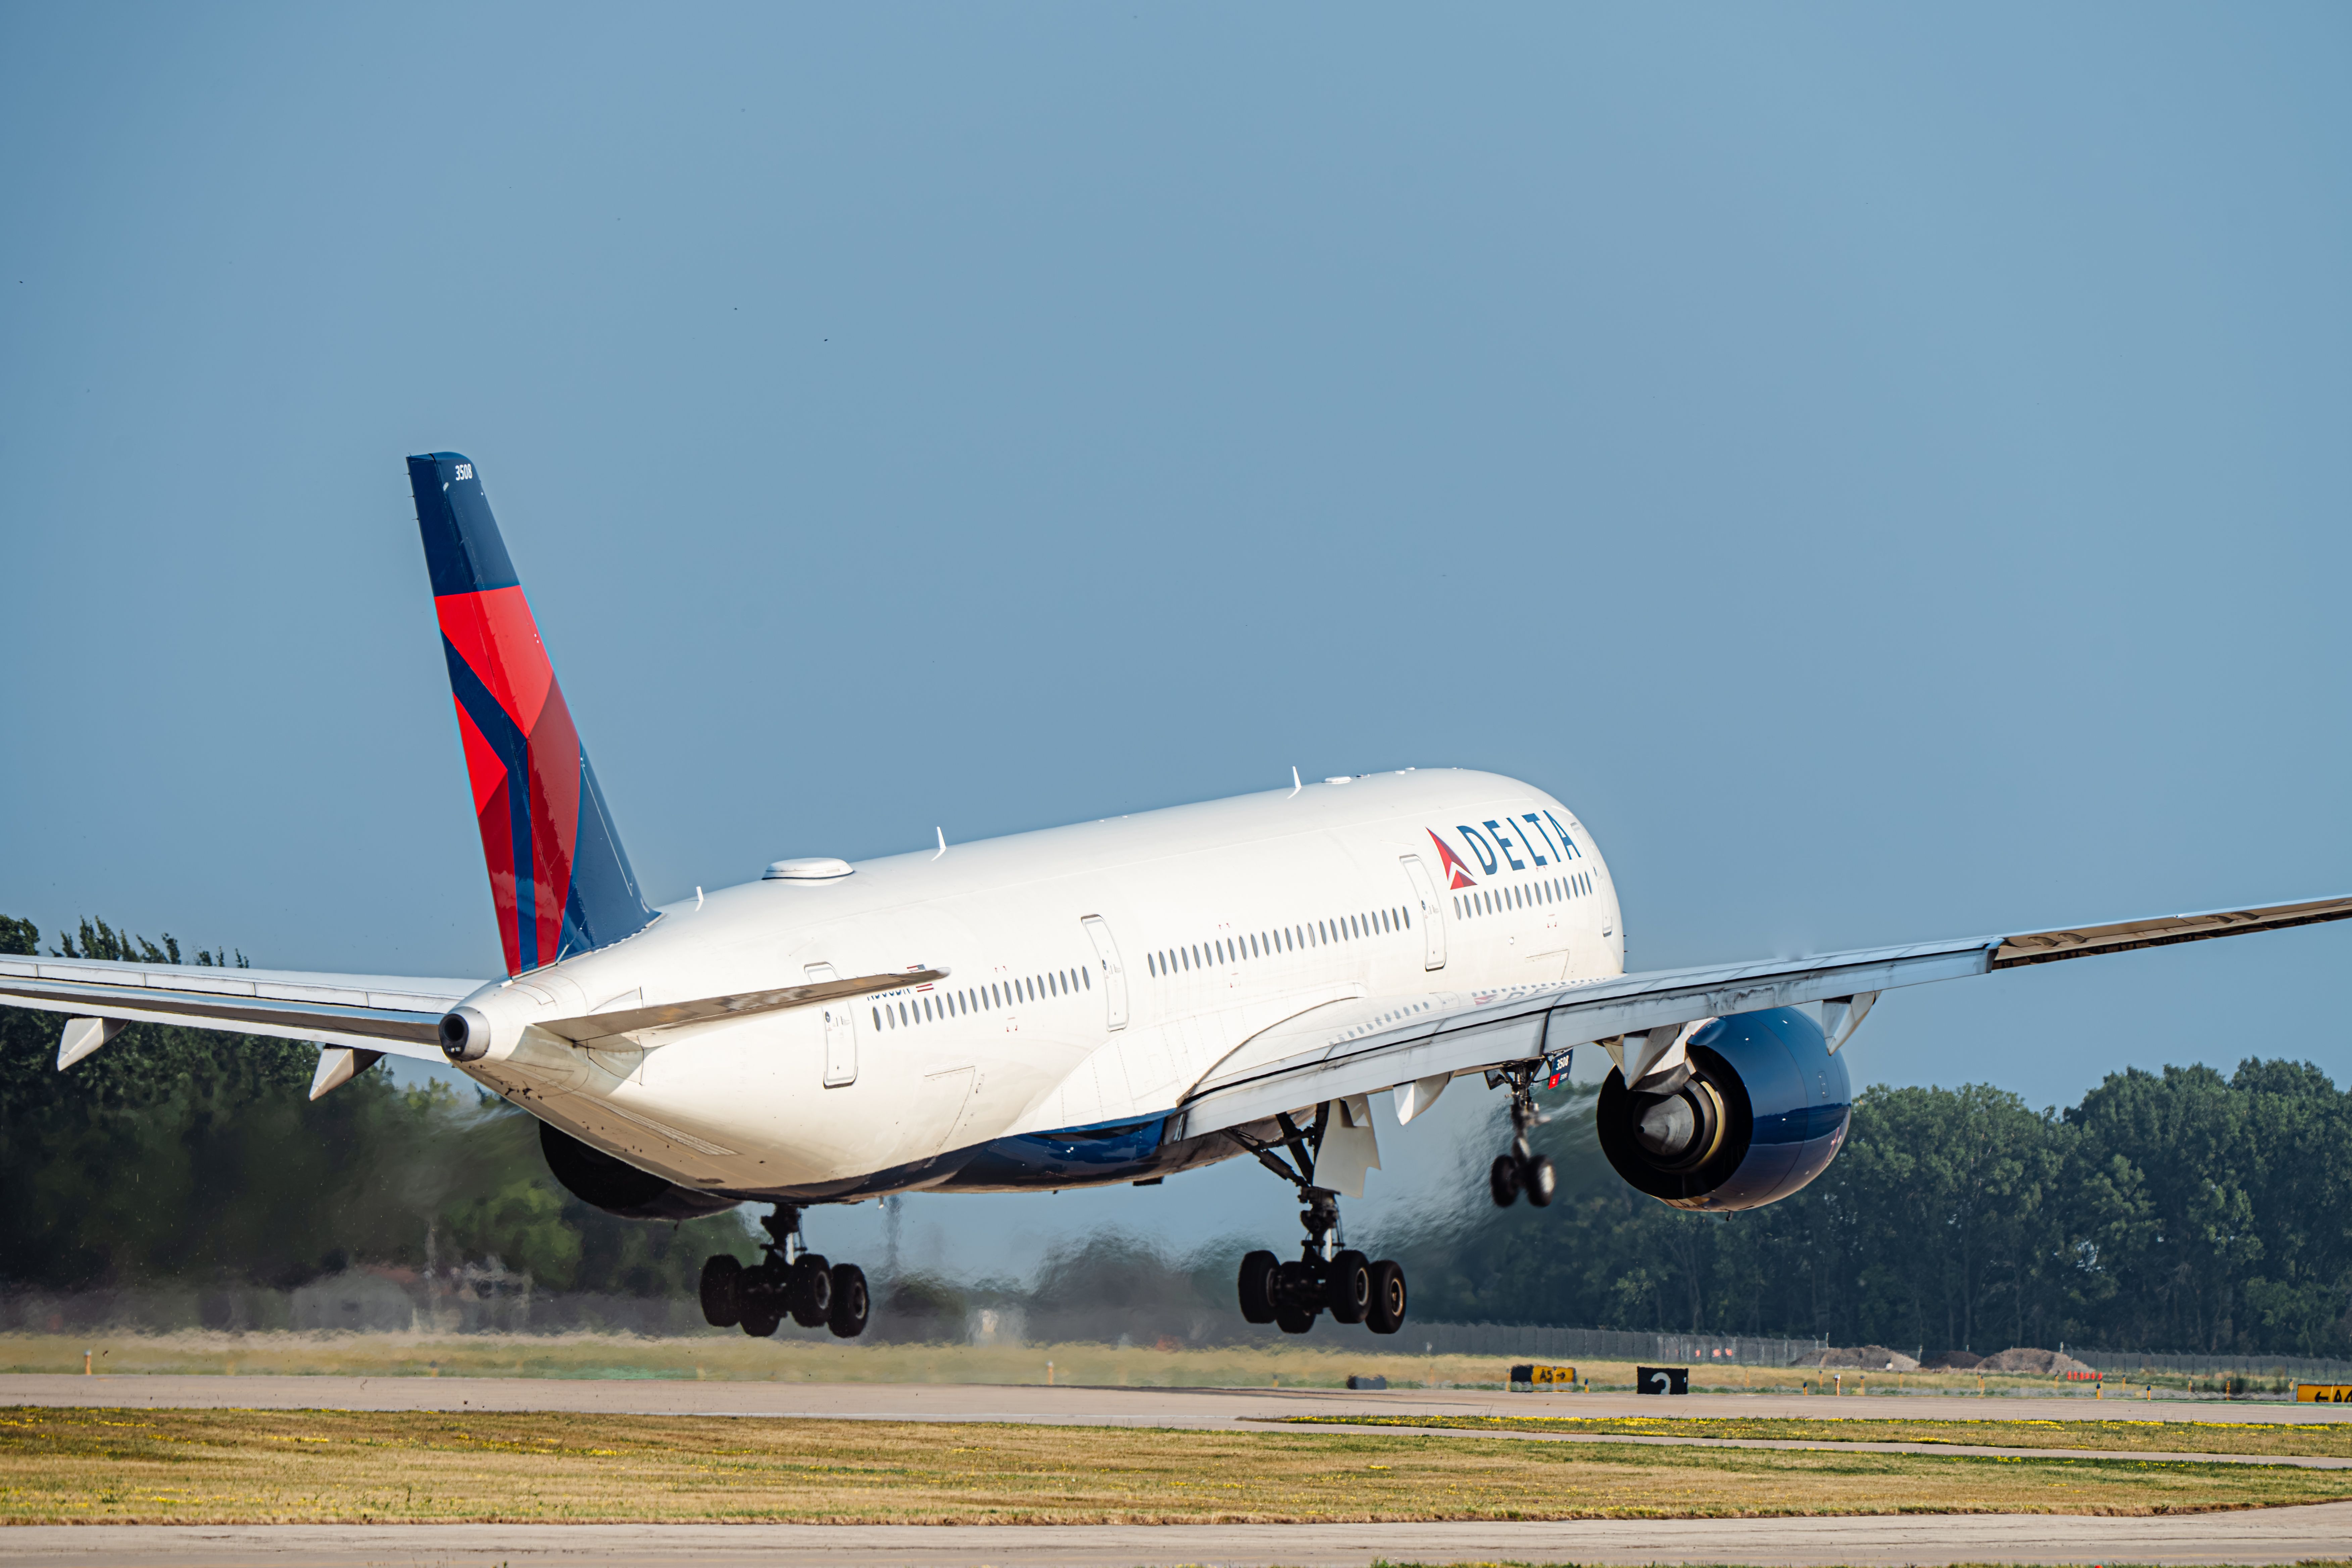 Delta Air Lines Airbus A350-900 taking off